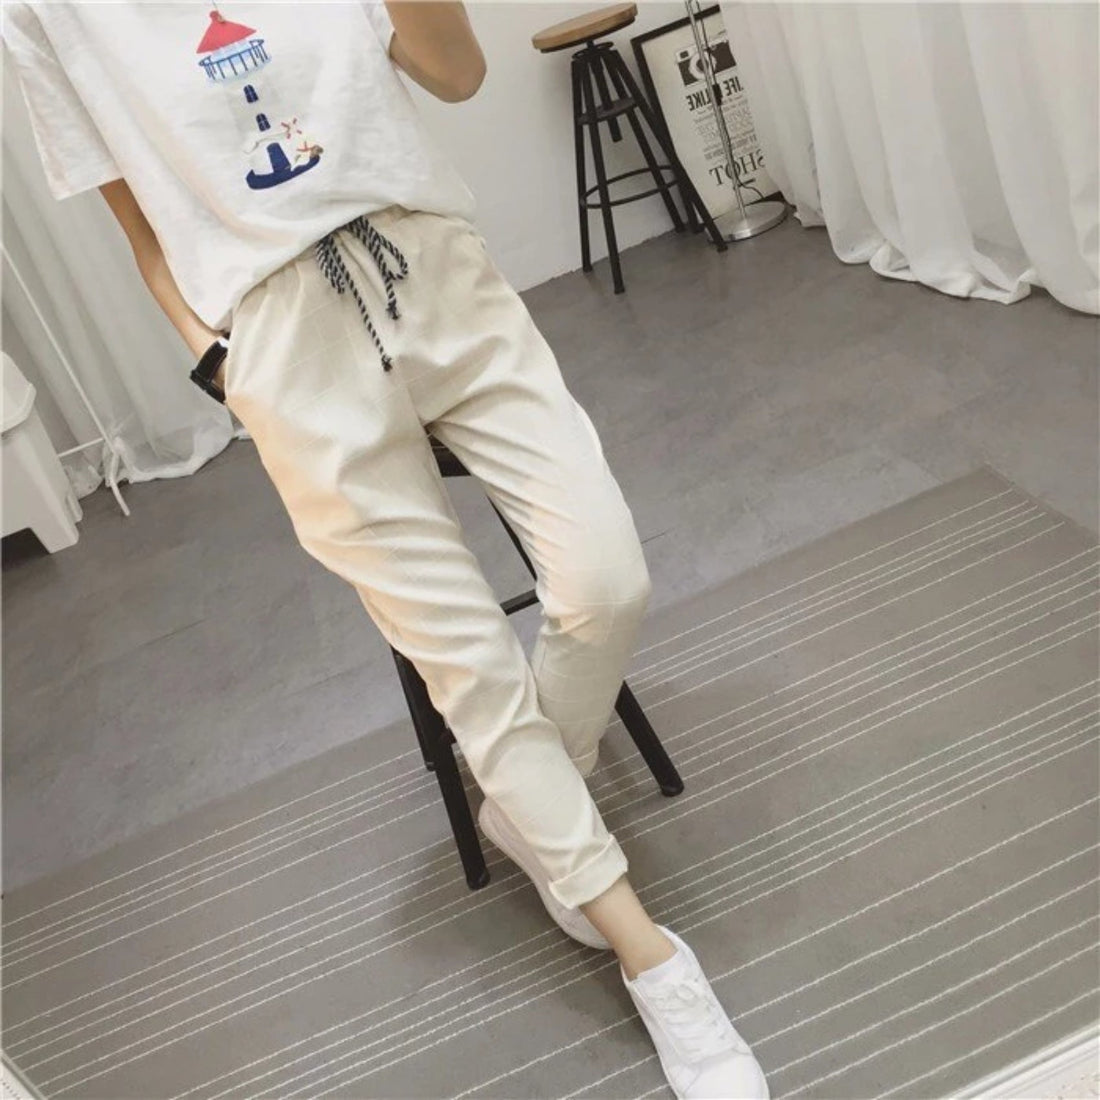 Women's Summer/Spring Casual Loose Cotton Plaid Pants